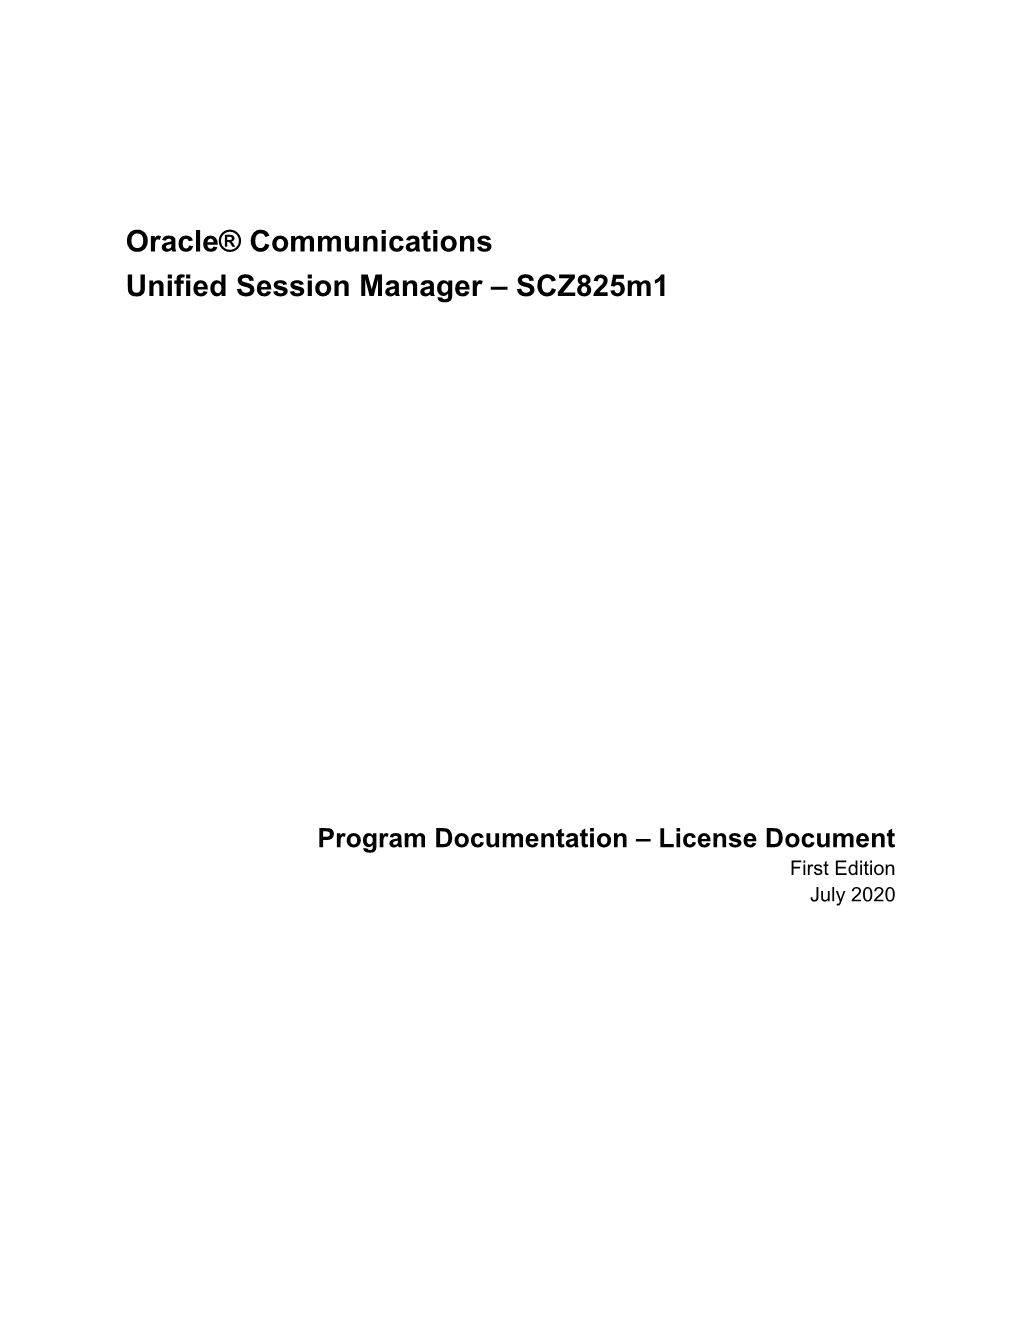 Oracle® Communications Unified Session Manager – Scz825m1